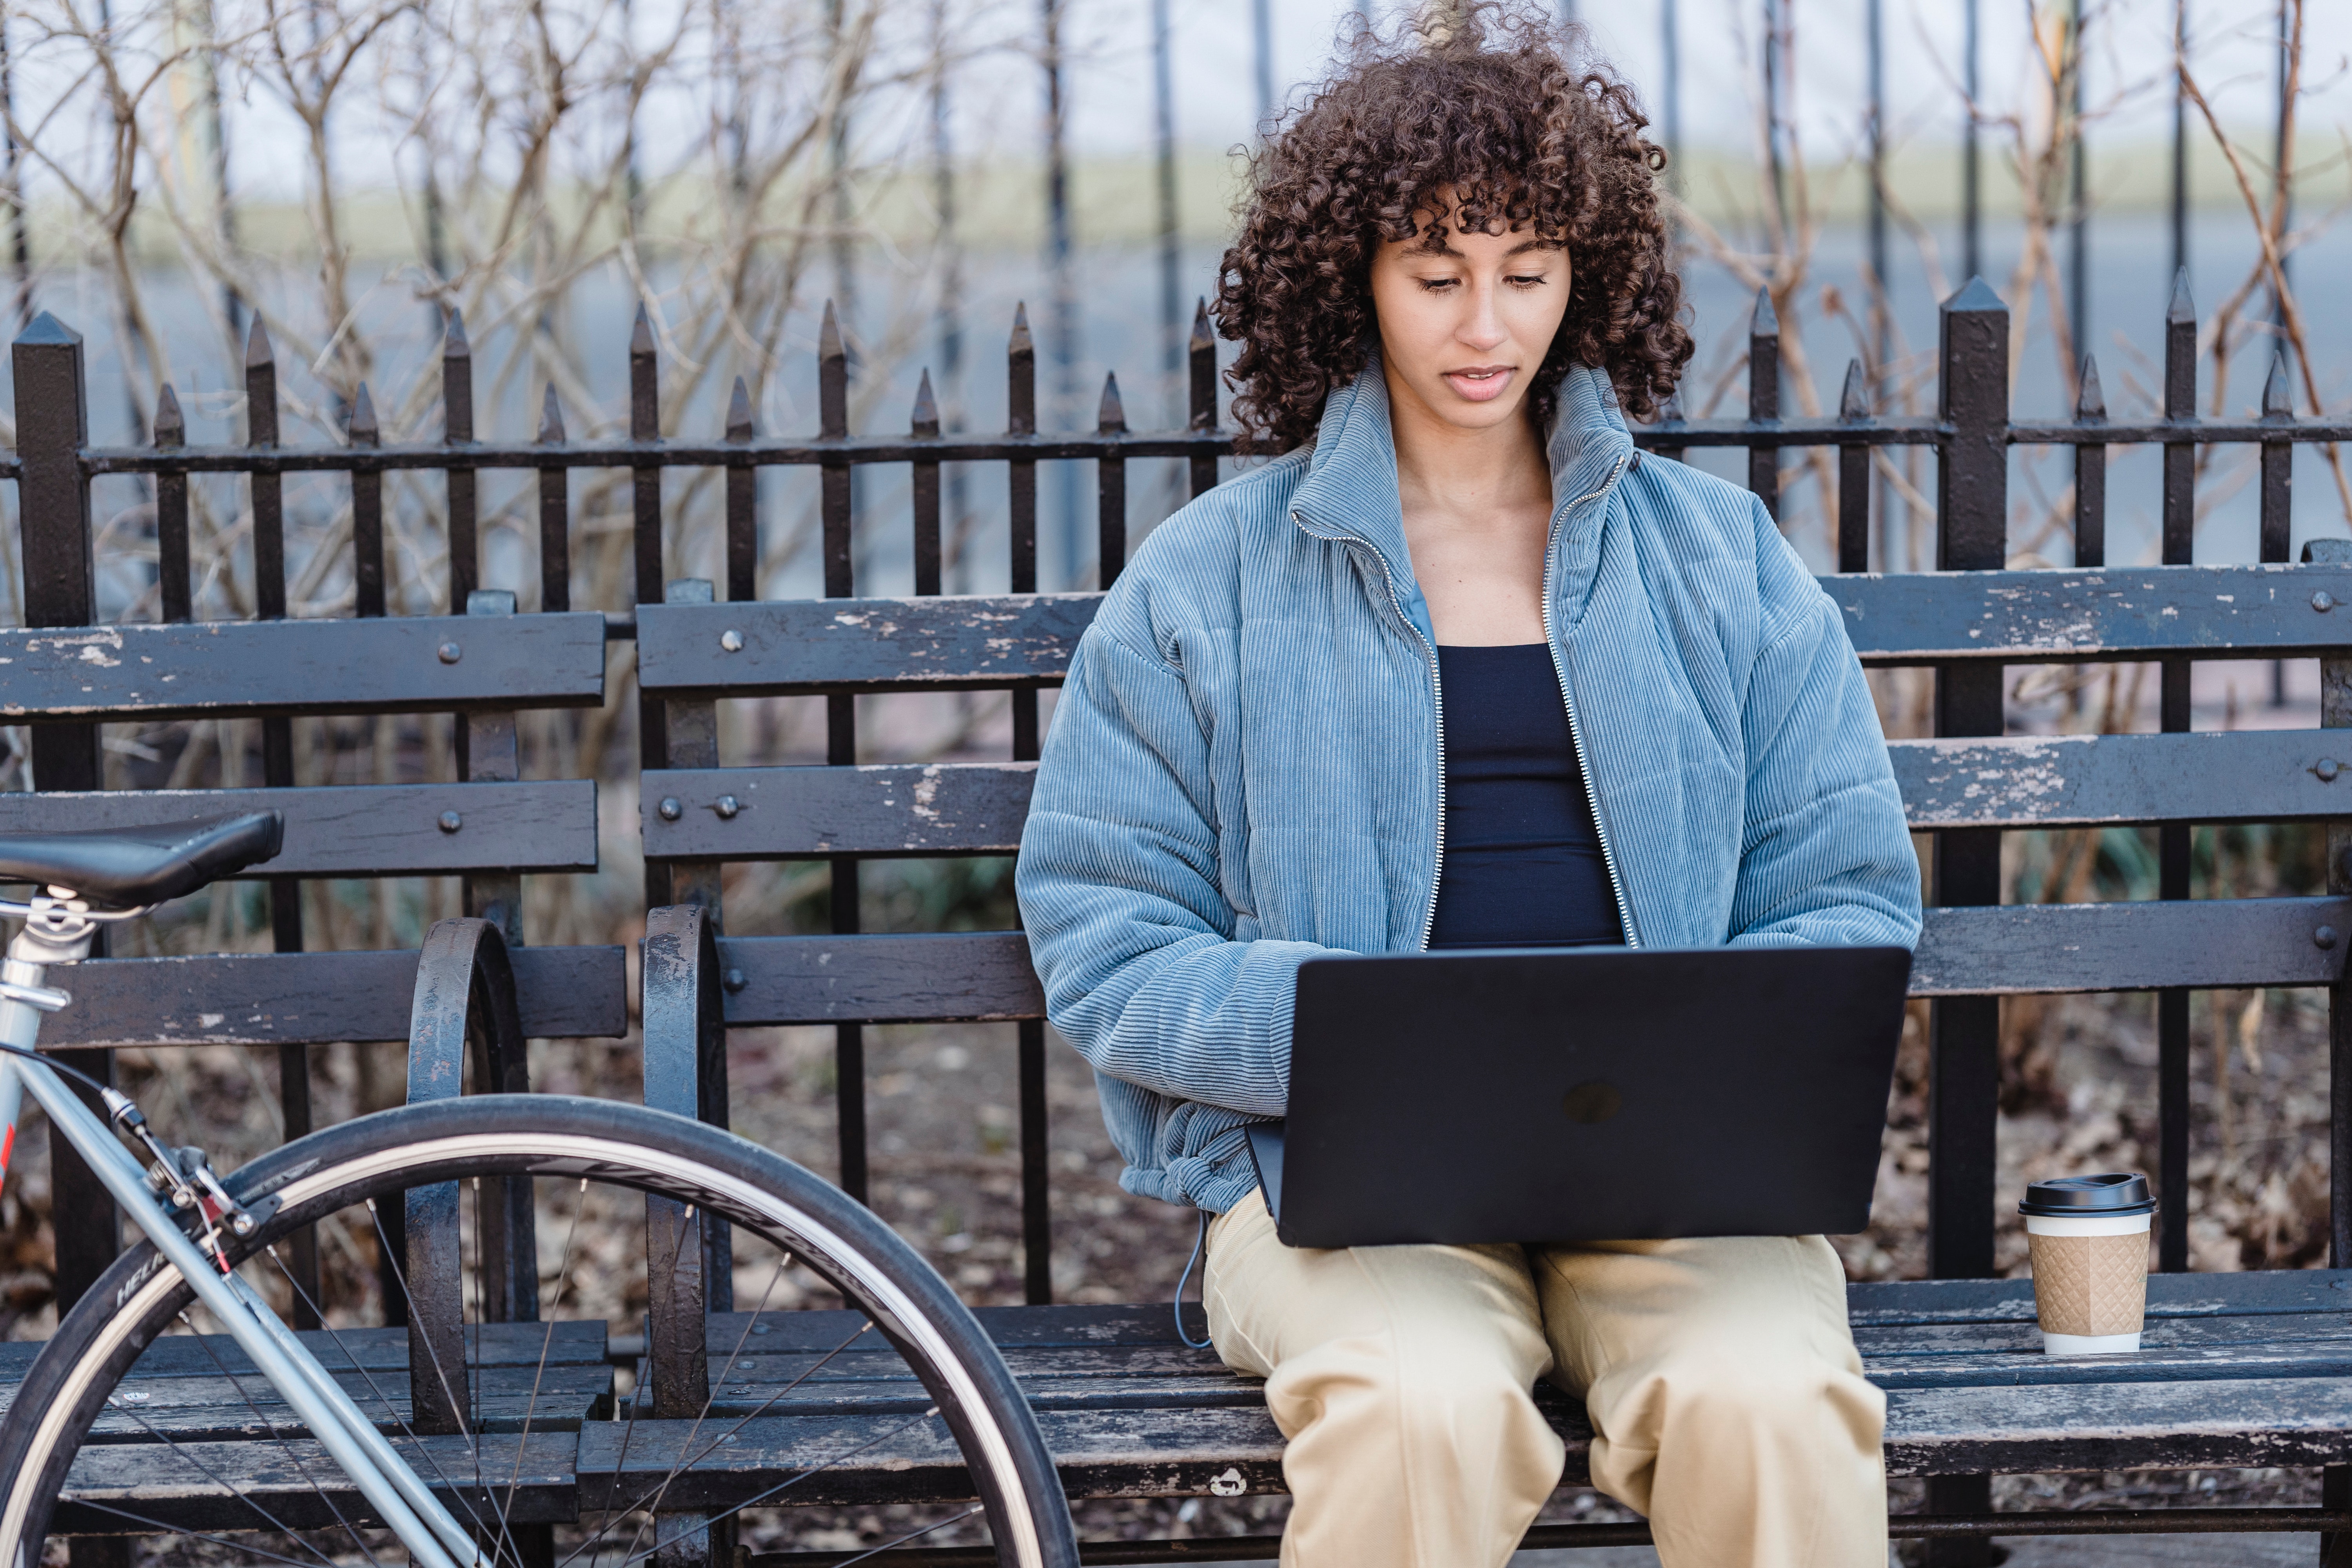 Woman sitting on park bench working on a laptop next to a coffee and a bicycle